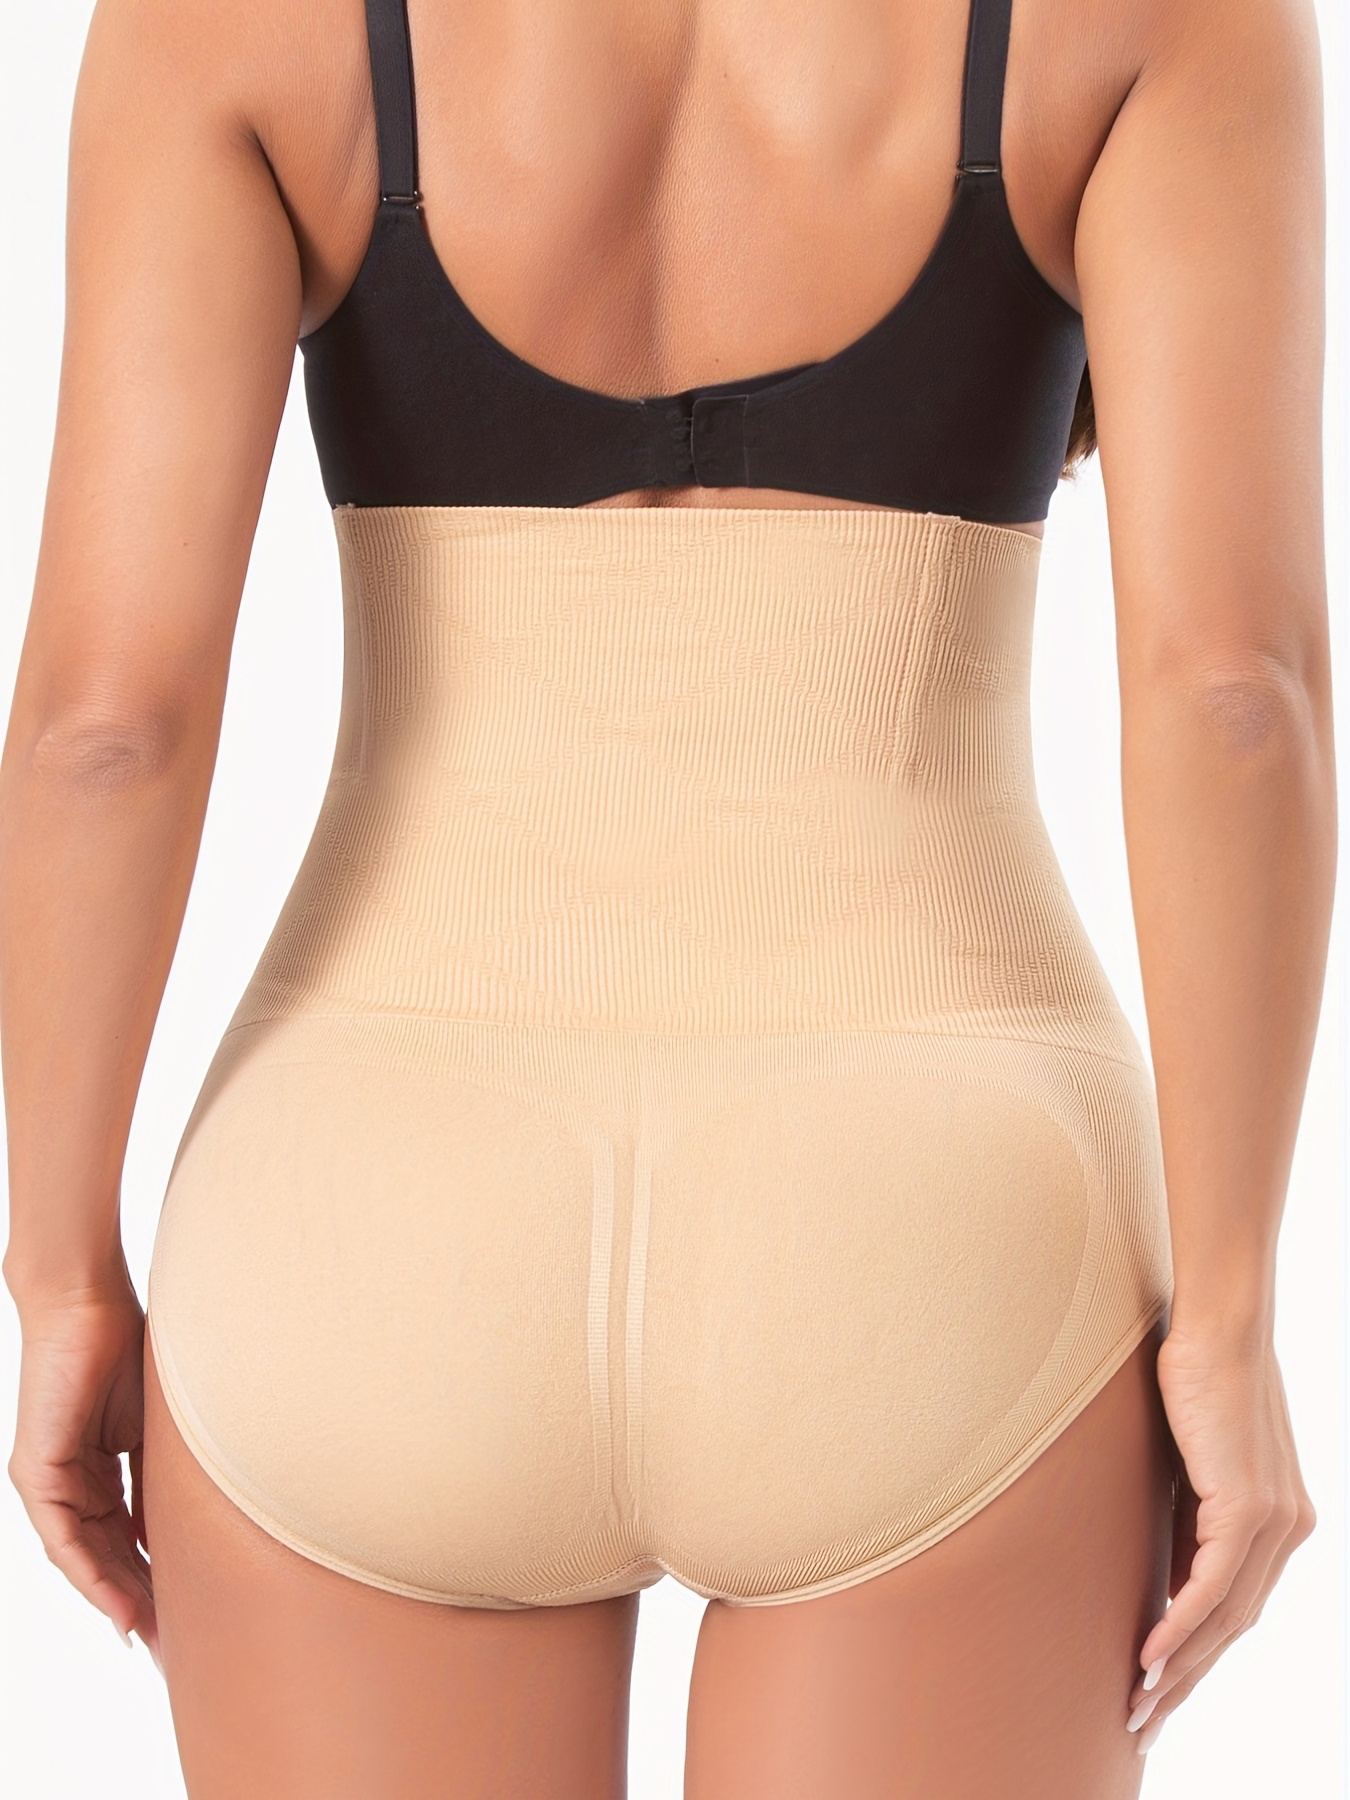 High Waisted Body Shaper Boyshorts for Women Comfy Breathable